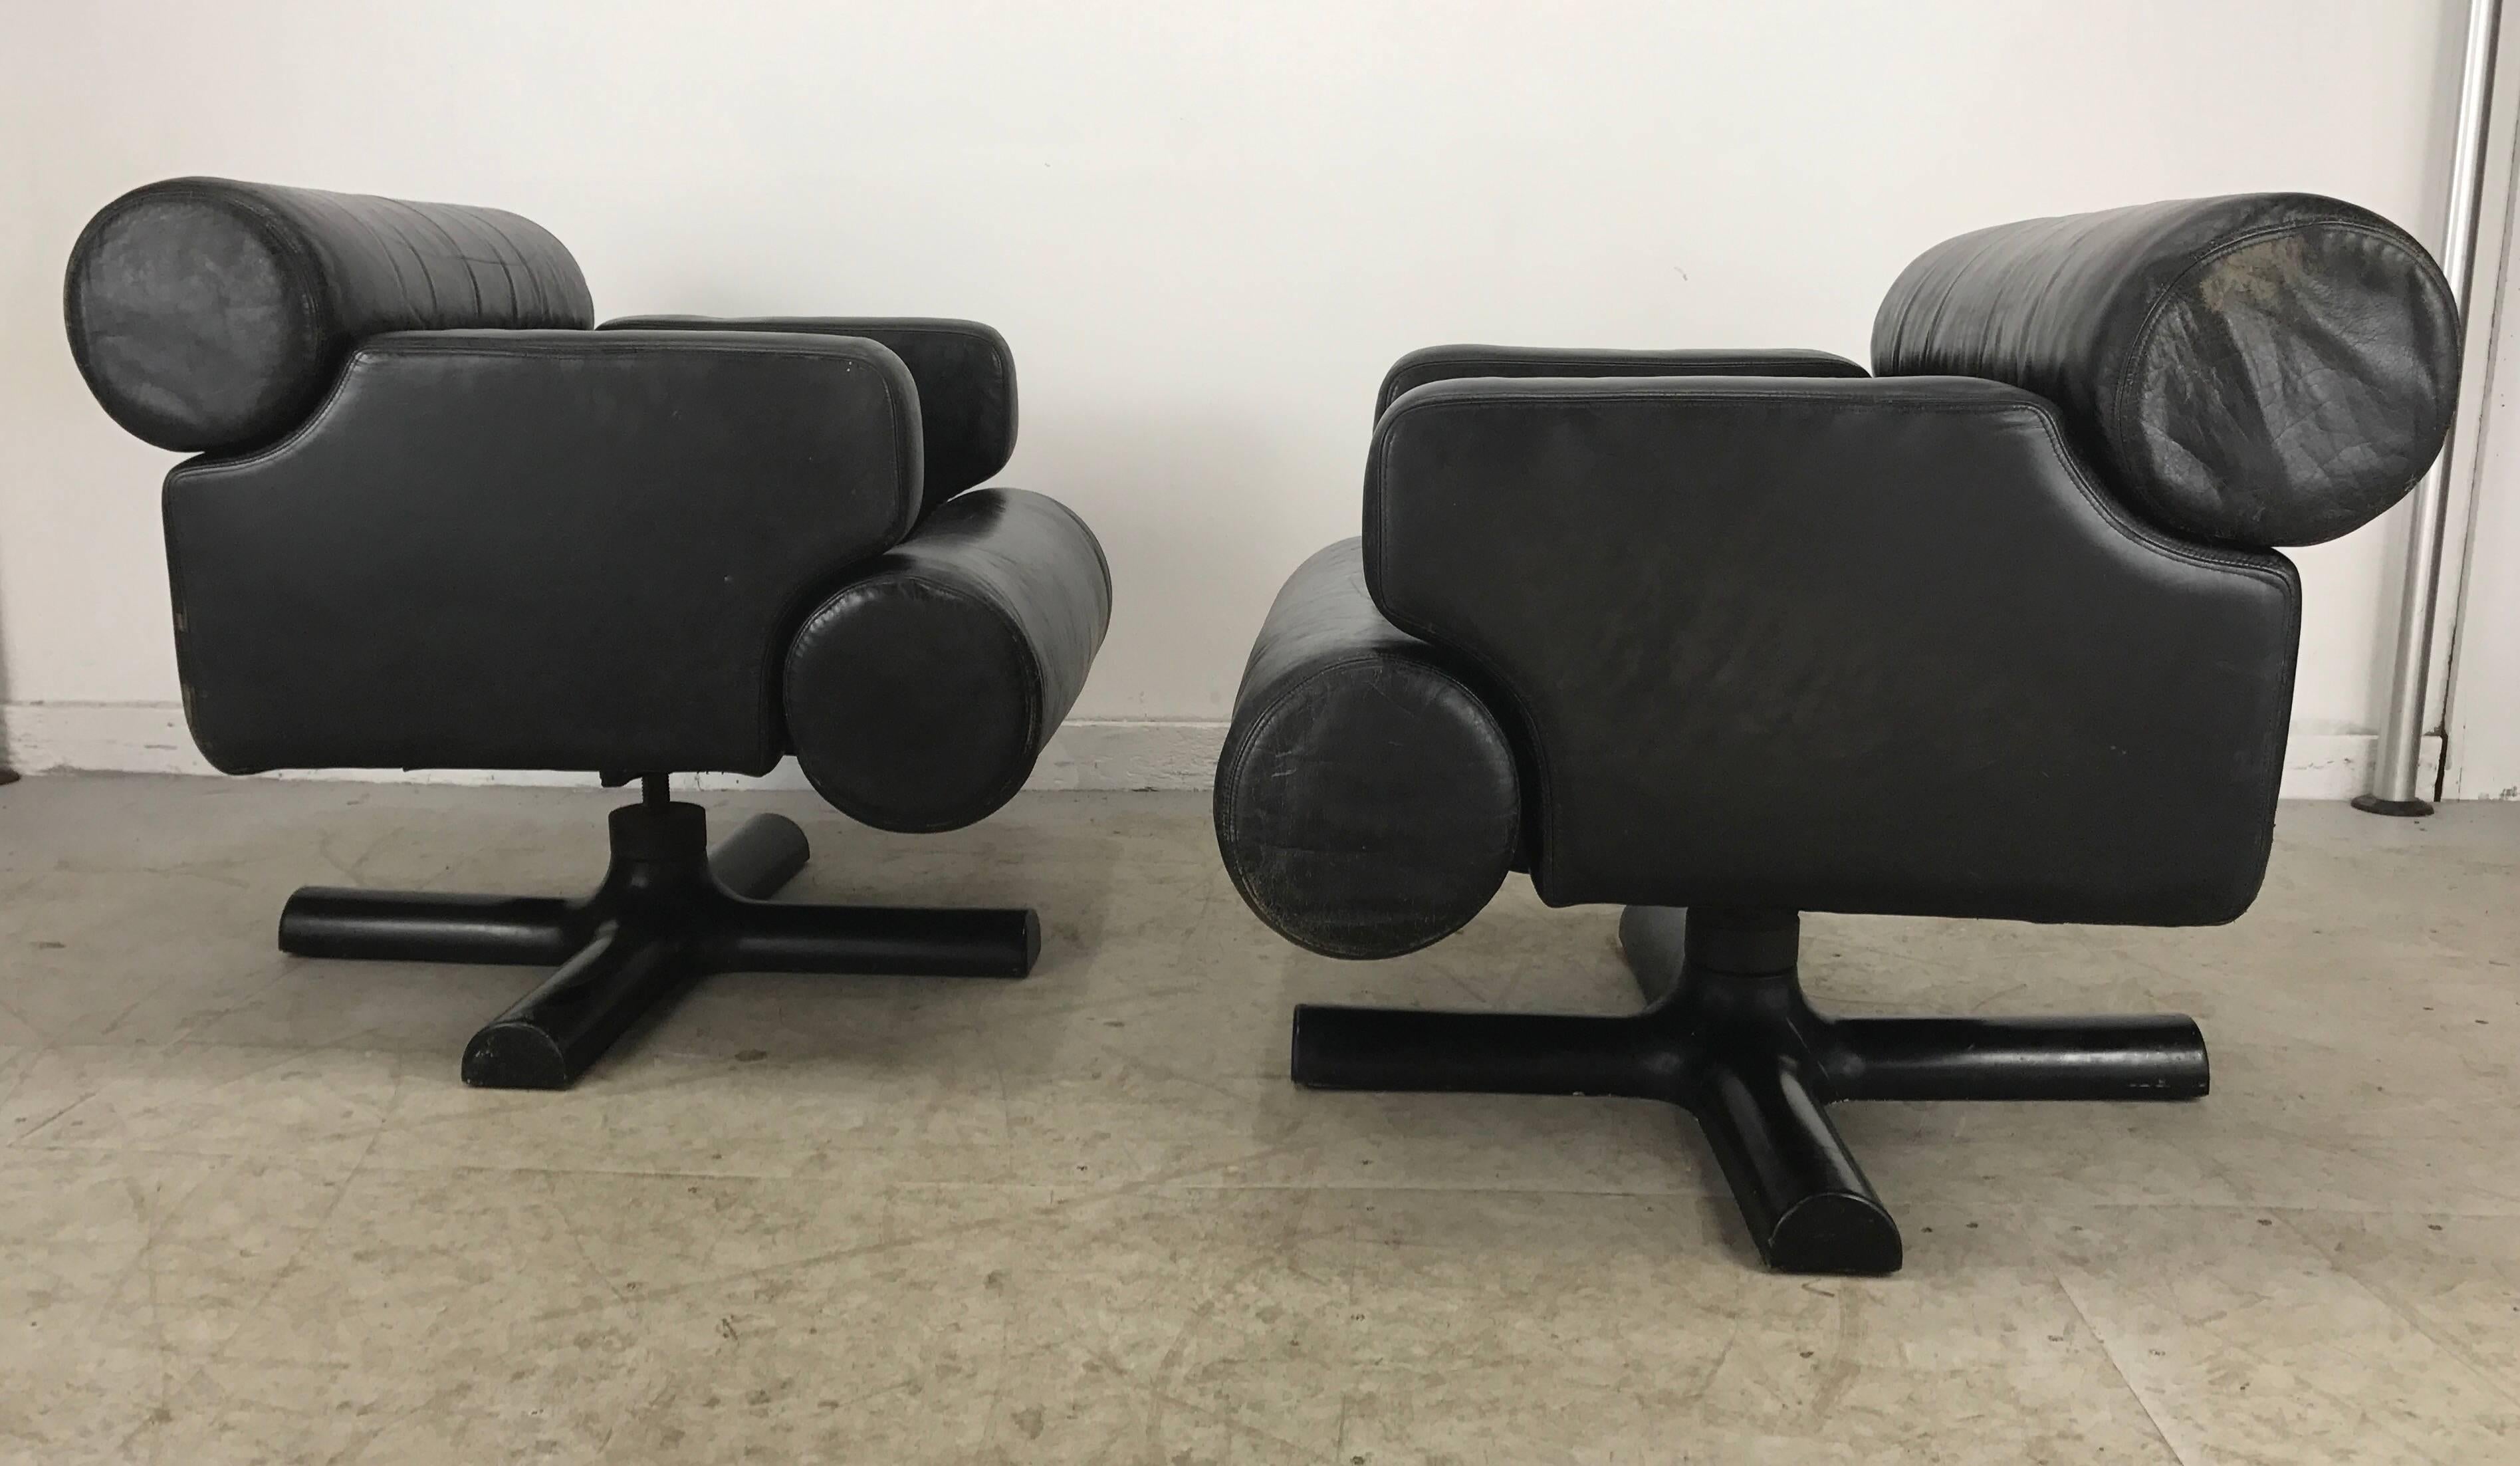 20th Century Rare Black Leather Pop Modernist, Space Age Chairs by William Lancing Plumb